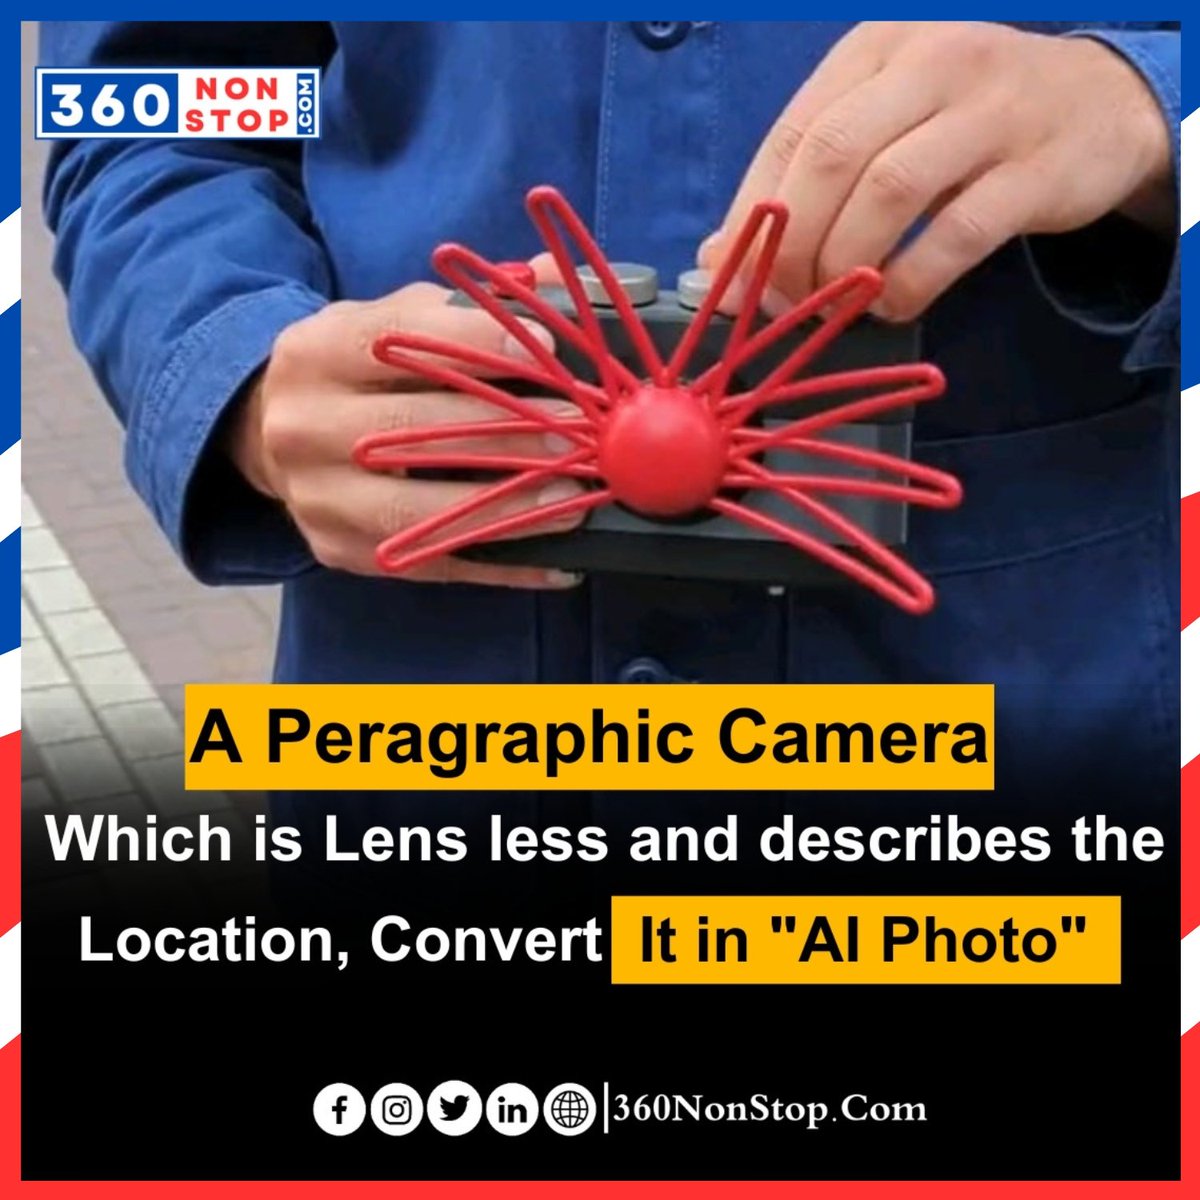 A Peragraphic Camera Which is Lens Less And Describes The Location ,Convert it in AI Photo.

#PeragraphicCamera #AIEnhancedPhotos #SmartImaging #NextGenPhotography #InnovativeTechnology #LocationDescription #AIAssistedPhotography #RevolutionaryCam #VisualIntelligence #360nonstop